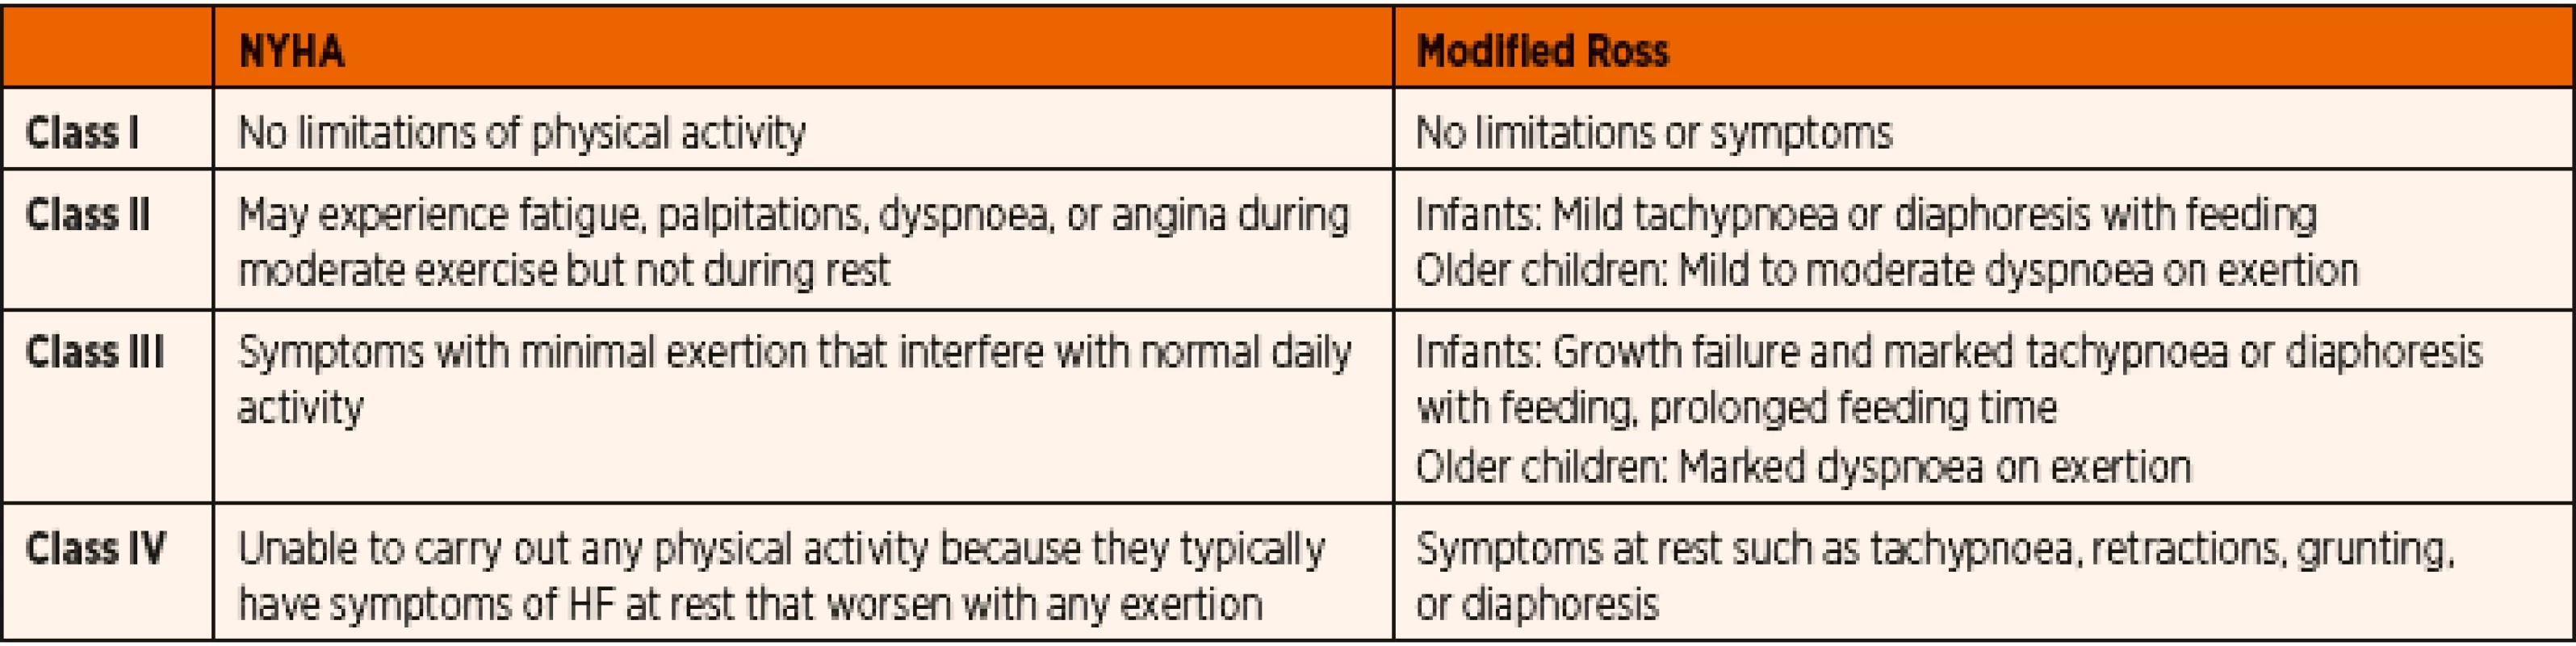 NYHA and Modified Ross Heart Failure Classification for Children.